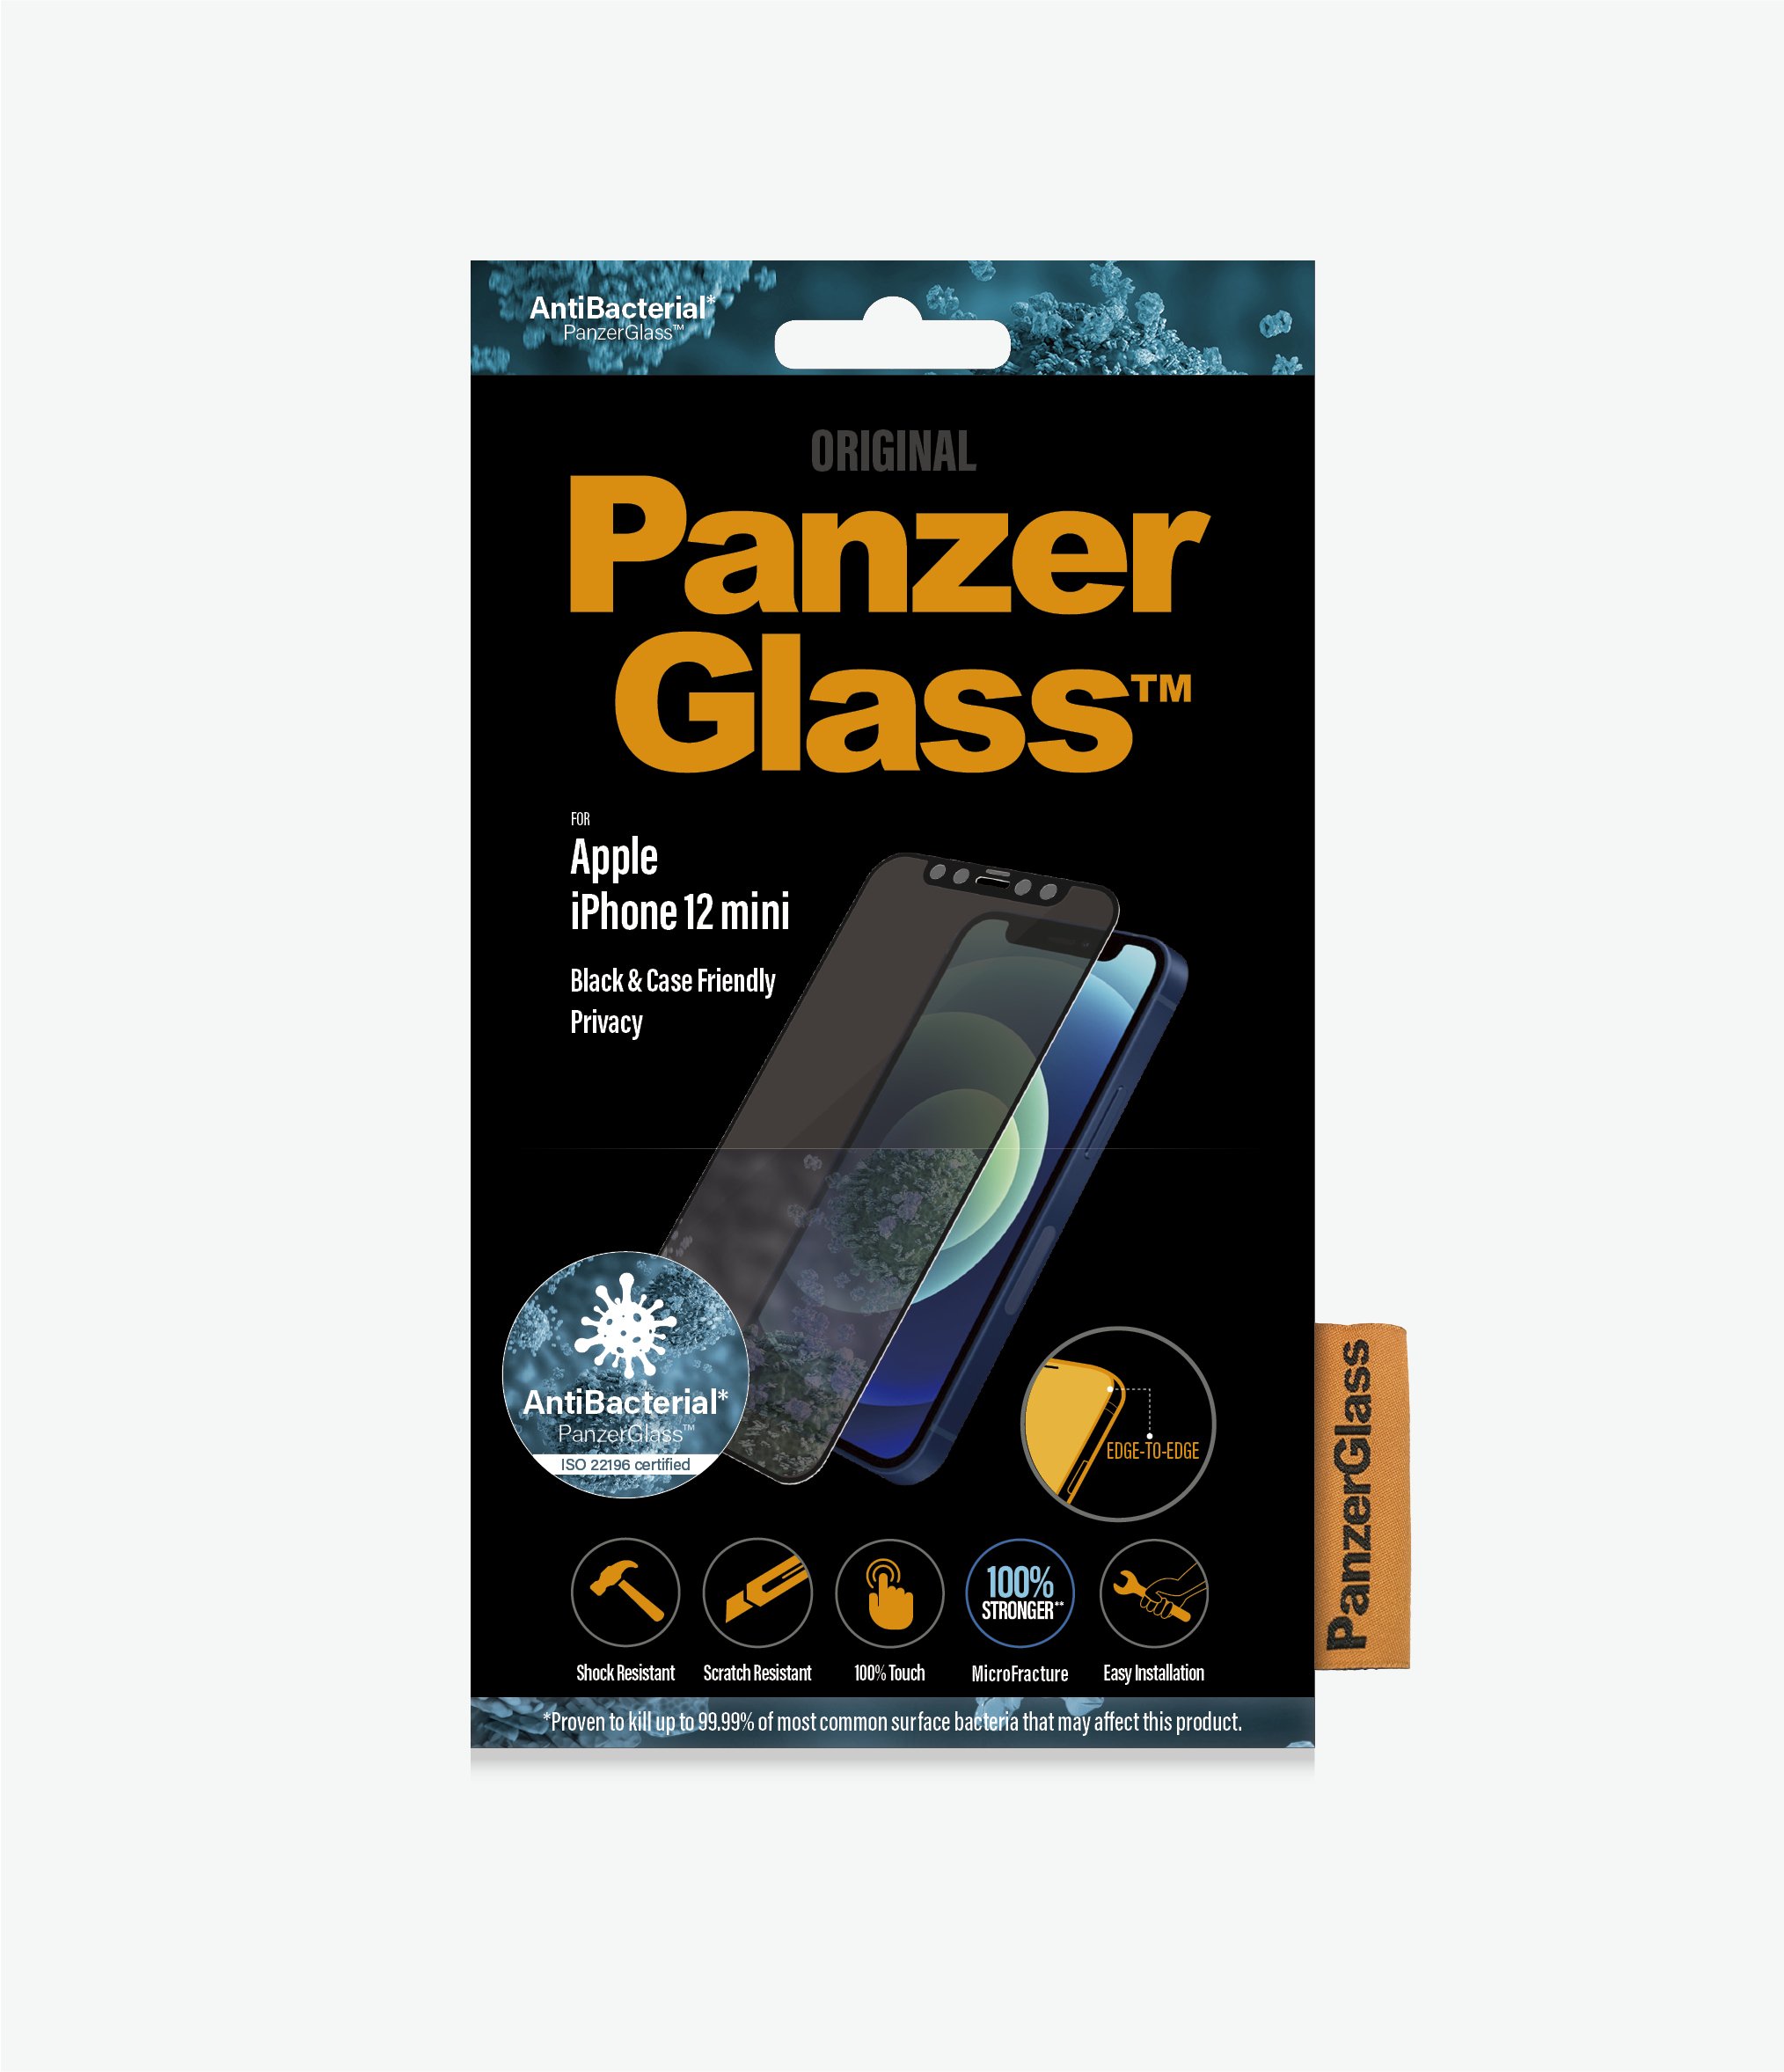 PanzerGlass™ Apple iPhone 12 Mini - Black - Privacy (P2710) - Screen Protector - Resistant to scratches and bacteria, Shock absorbing, Privacy glass